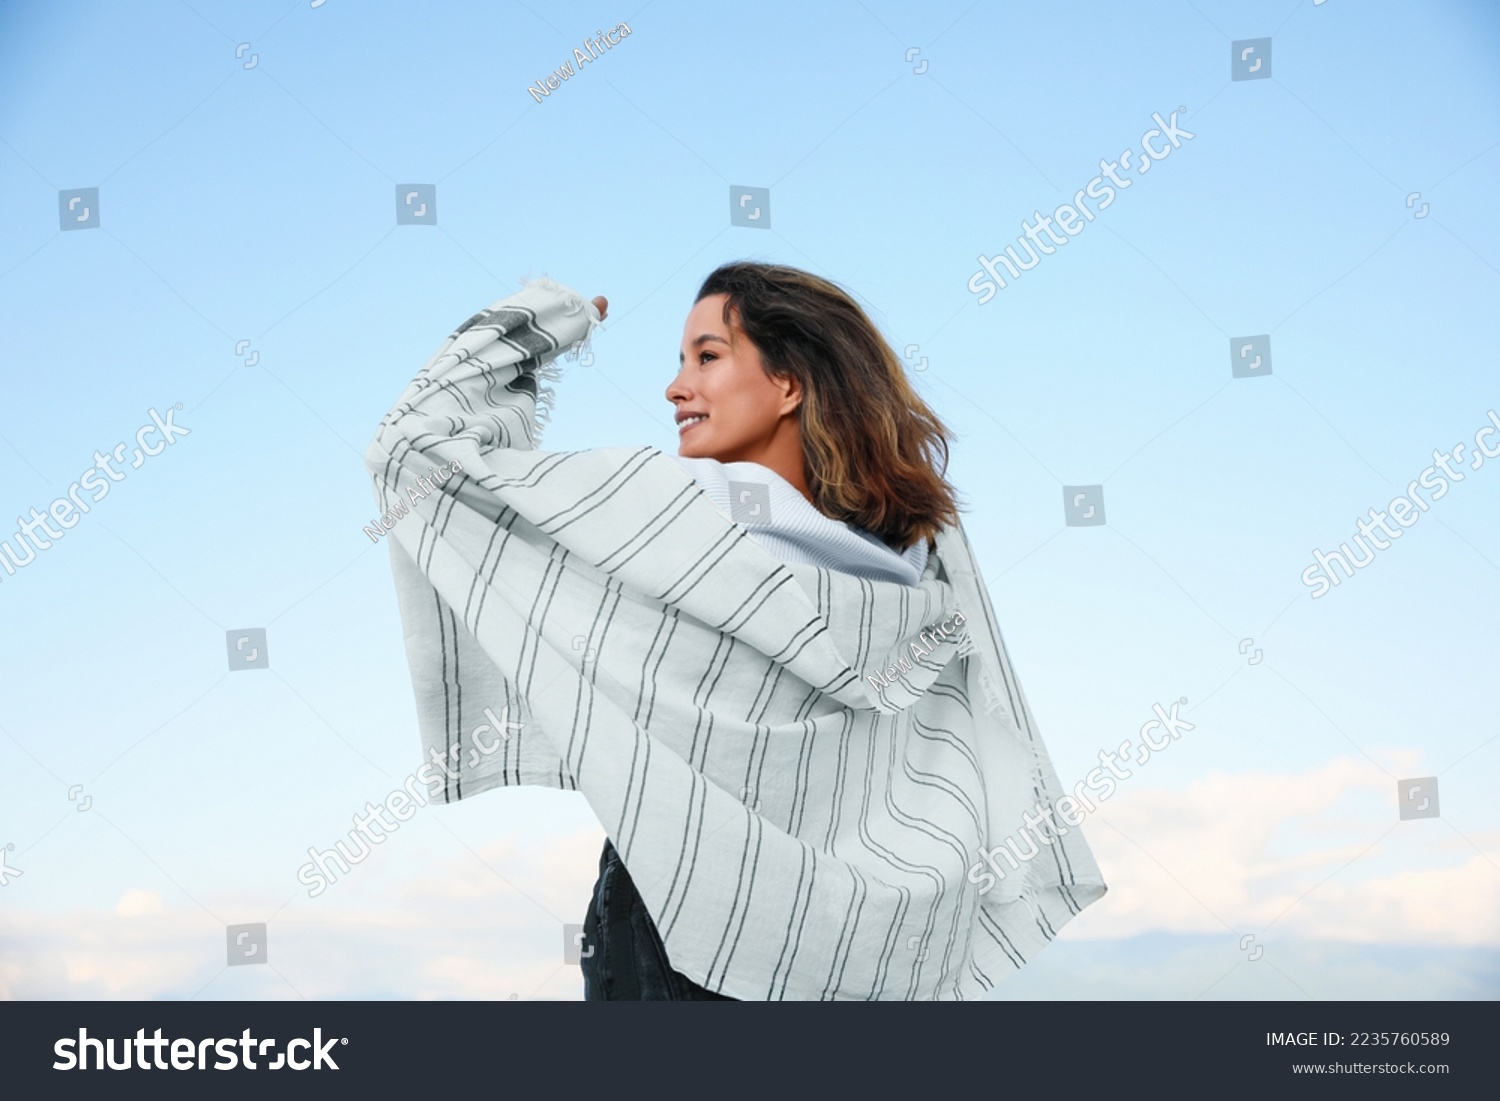 Portrait of beautiful young woman against blue sky #2235760589